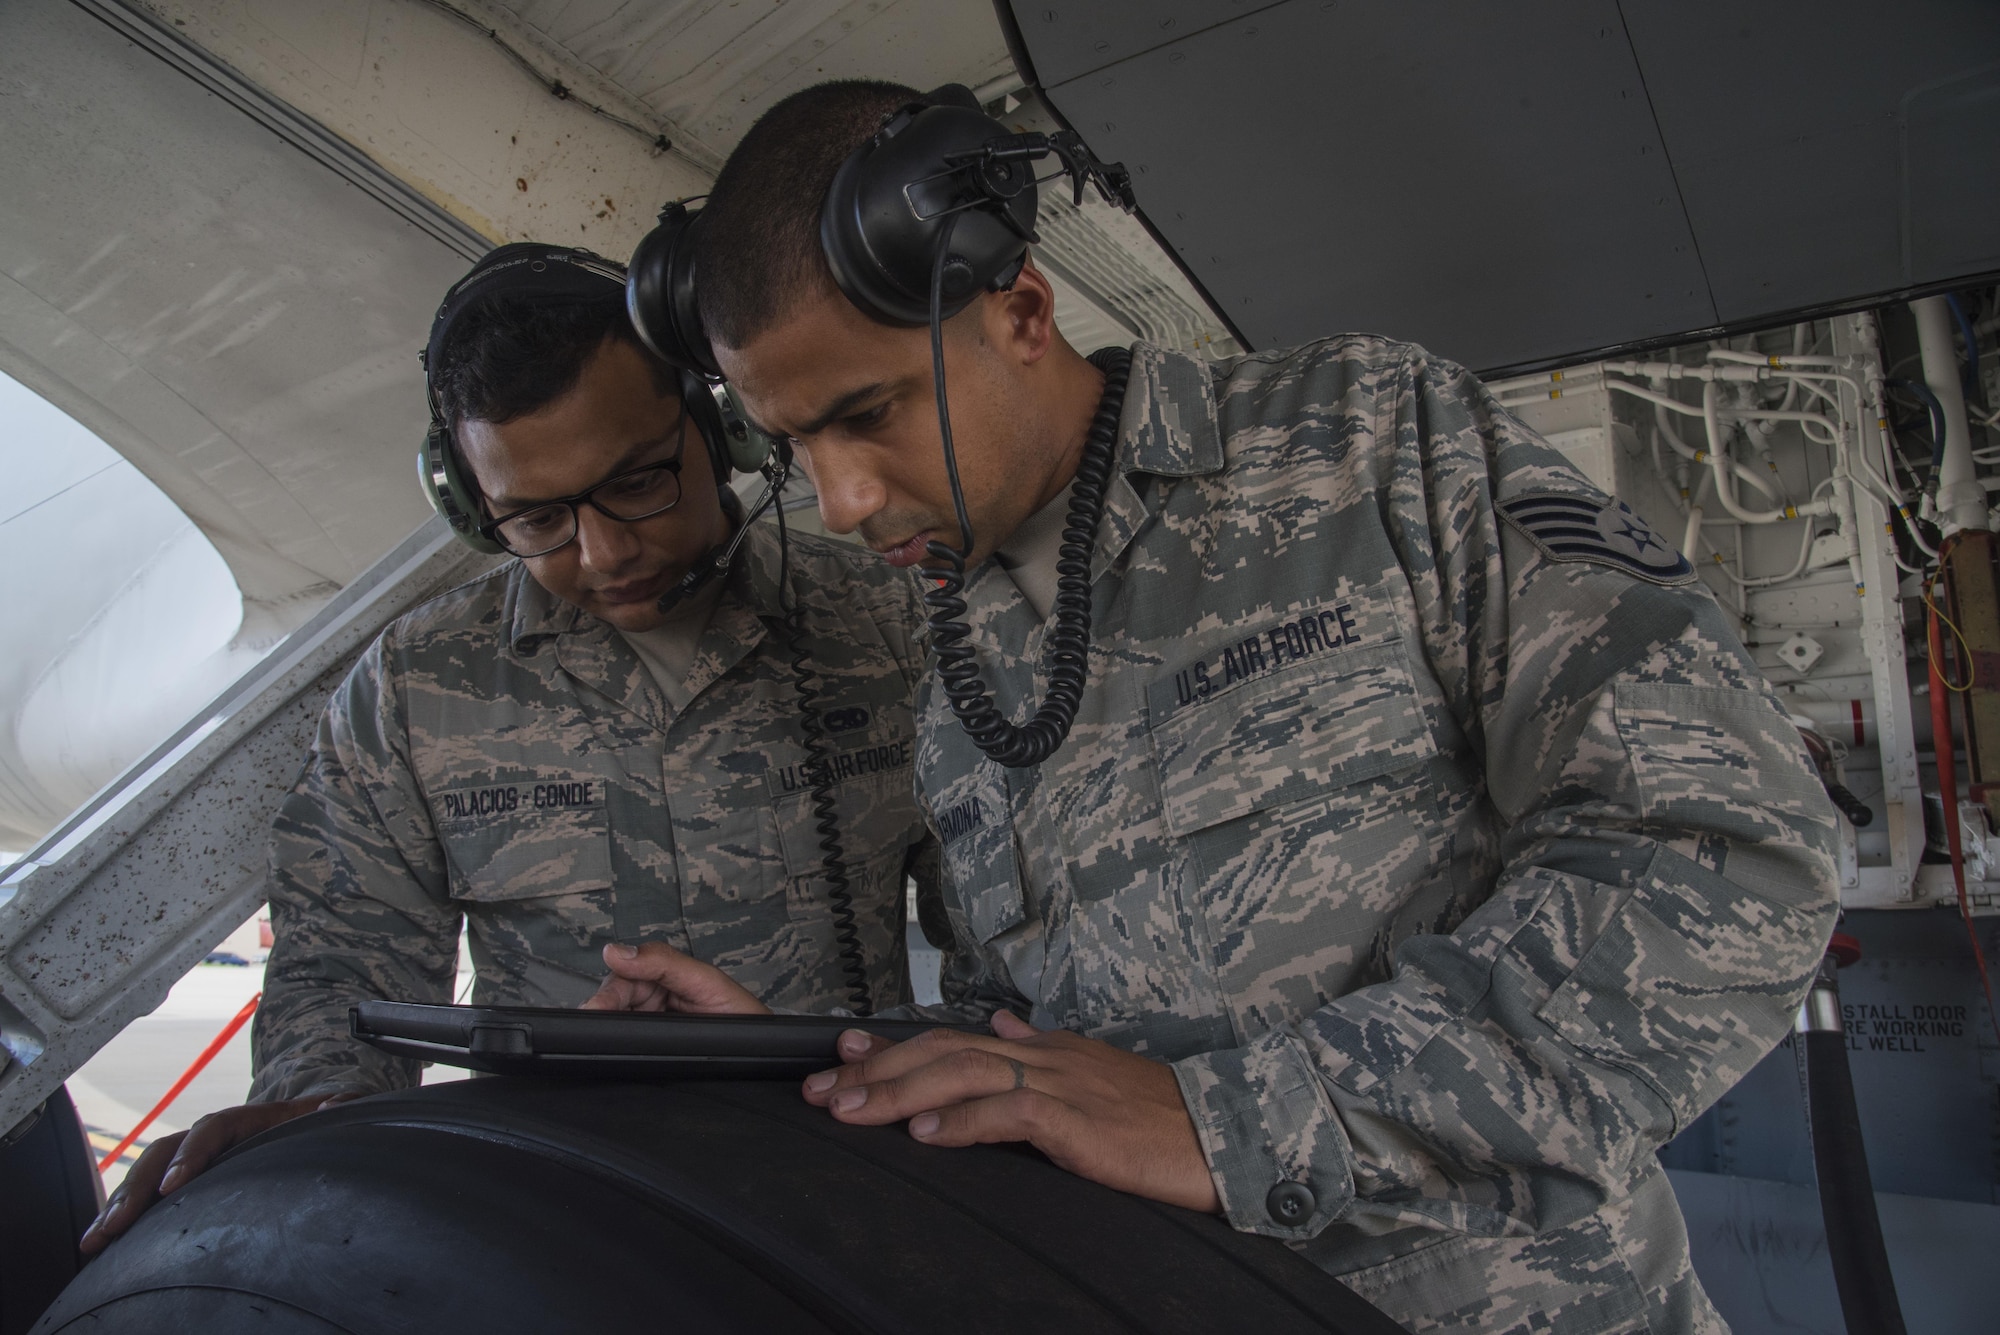 Staff Sergeant Jonathan Carmona, crew chief (right), reviews a technical order with Senior Airman Jonathan Palascios-Conde, crew chief (left), on the 108th Wing flightline at Joint Base McGuire-Dix-Lakehurst, N.J., Sept. 20, 2017. The maintainers, are refueling a KC-135 in preparation of an upcoming mission. (U.S. Air National Guard photo by Staff Sgt. Ross A. Whitley/Released)